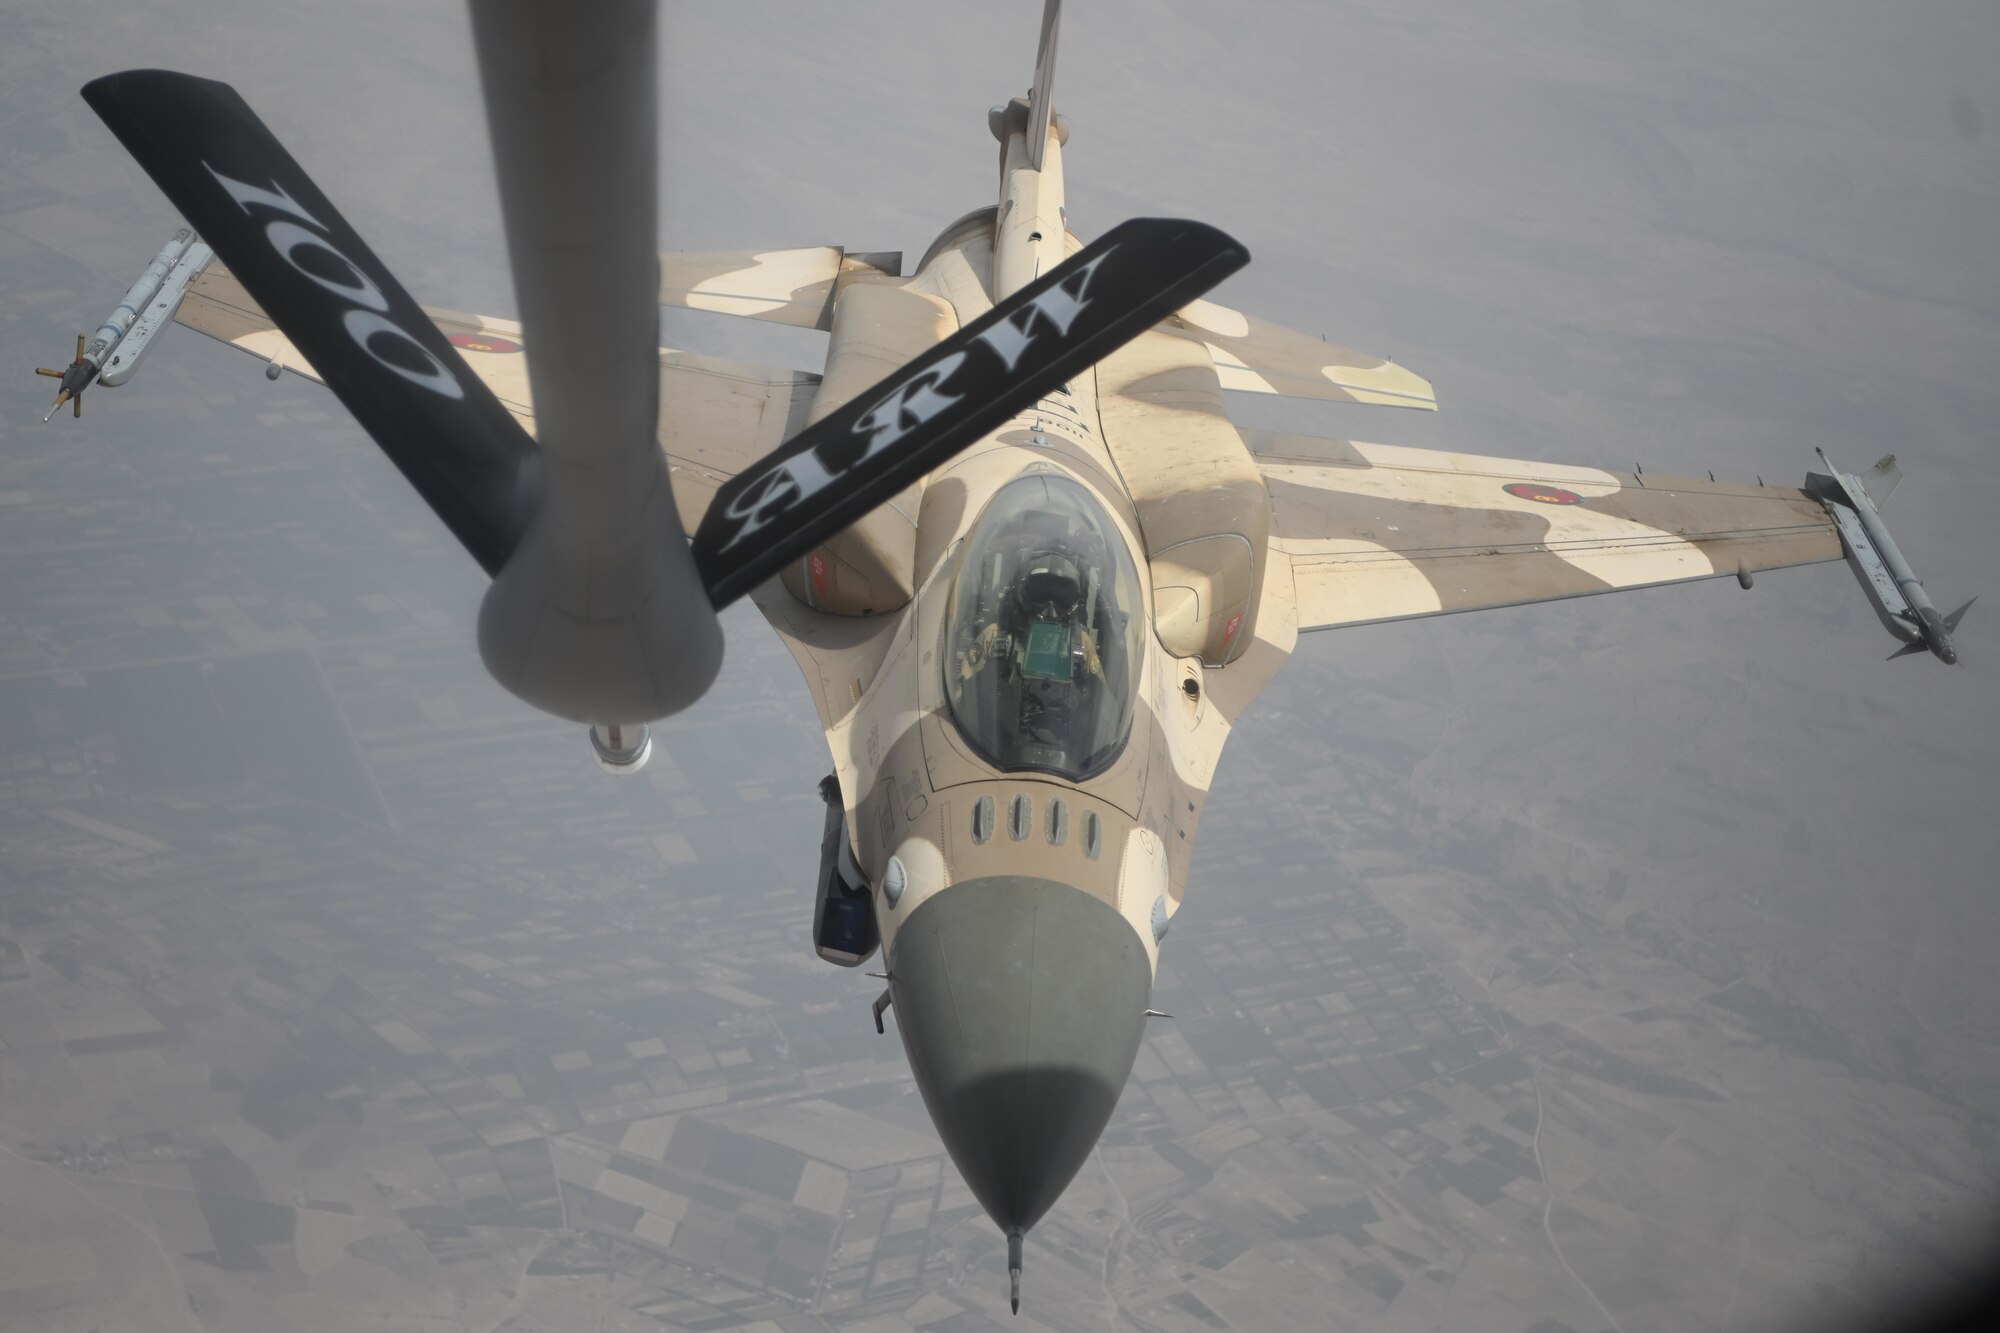 A Royal Moroccan Air Force F-16 Fighting Falcon aircraft departs from a U.S. Air Force KC-135 Stratotanker aircraft after refueling over Morocco during Exercise African Lion 2021, June 15, 2021. Air refueling with our partners increases the range and effectiveness of our aircraft, strengthening our multi-national force.



African Lion is U.S. Africa Command's largest, premier, joint, annual exercise hosted by Morocco, Tunisia and Senegal, 7-18 June. More than 7,000 participants from nine nations and NATO train together with a focus on enhancing readiness for U.S. and partner nation forces. African Lion is a multi-domain, multi-component, and multi-national exercise, which employs a full array of mission capabilities with the goal to strengthen interoperability among participants. (U.S. Air Force photo by Senior Airman Joseph Barron)